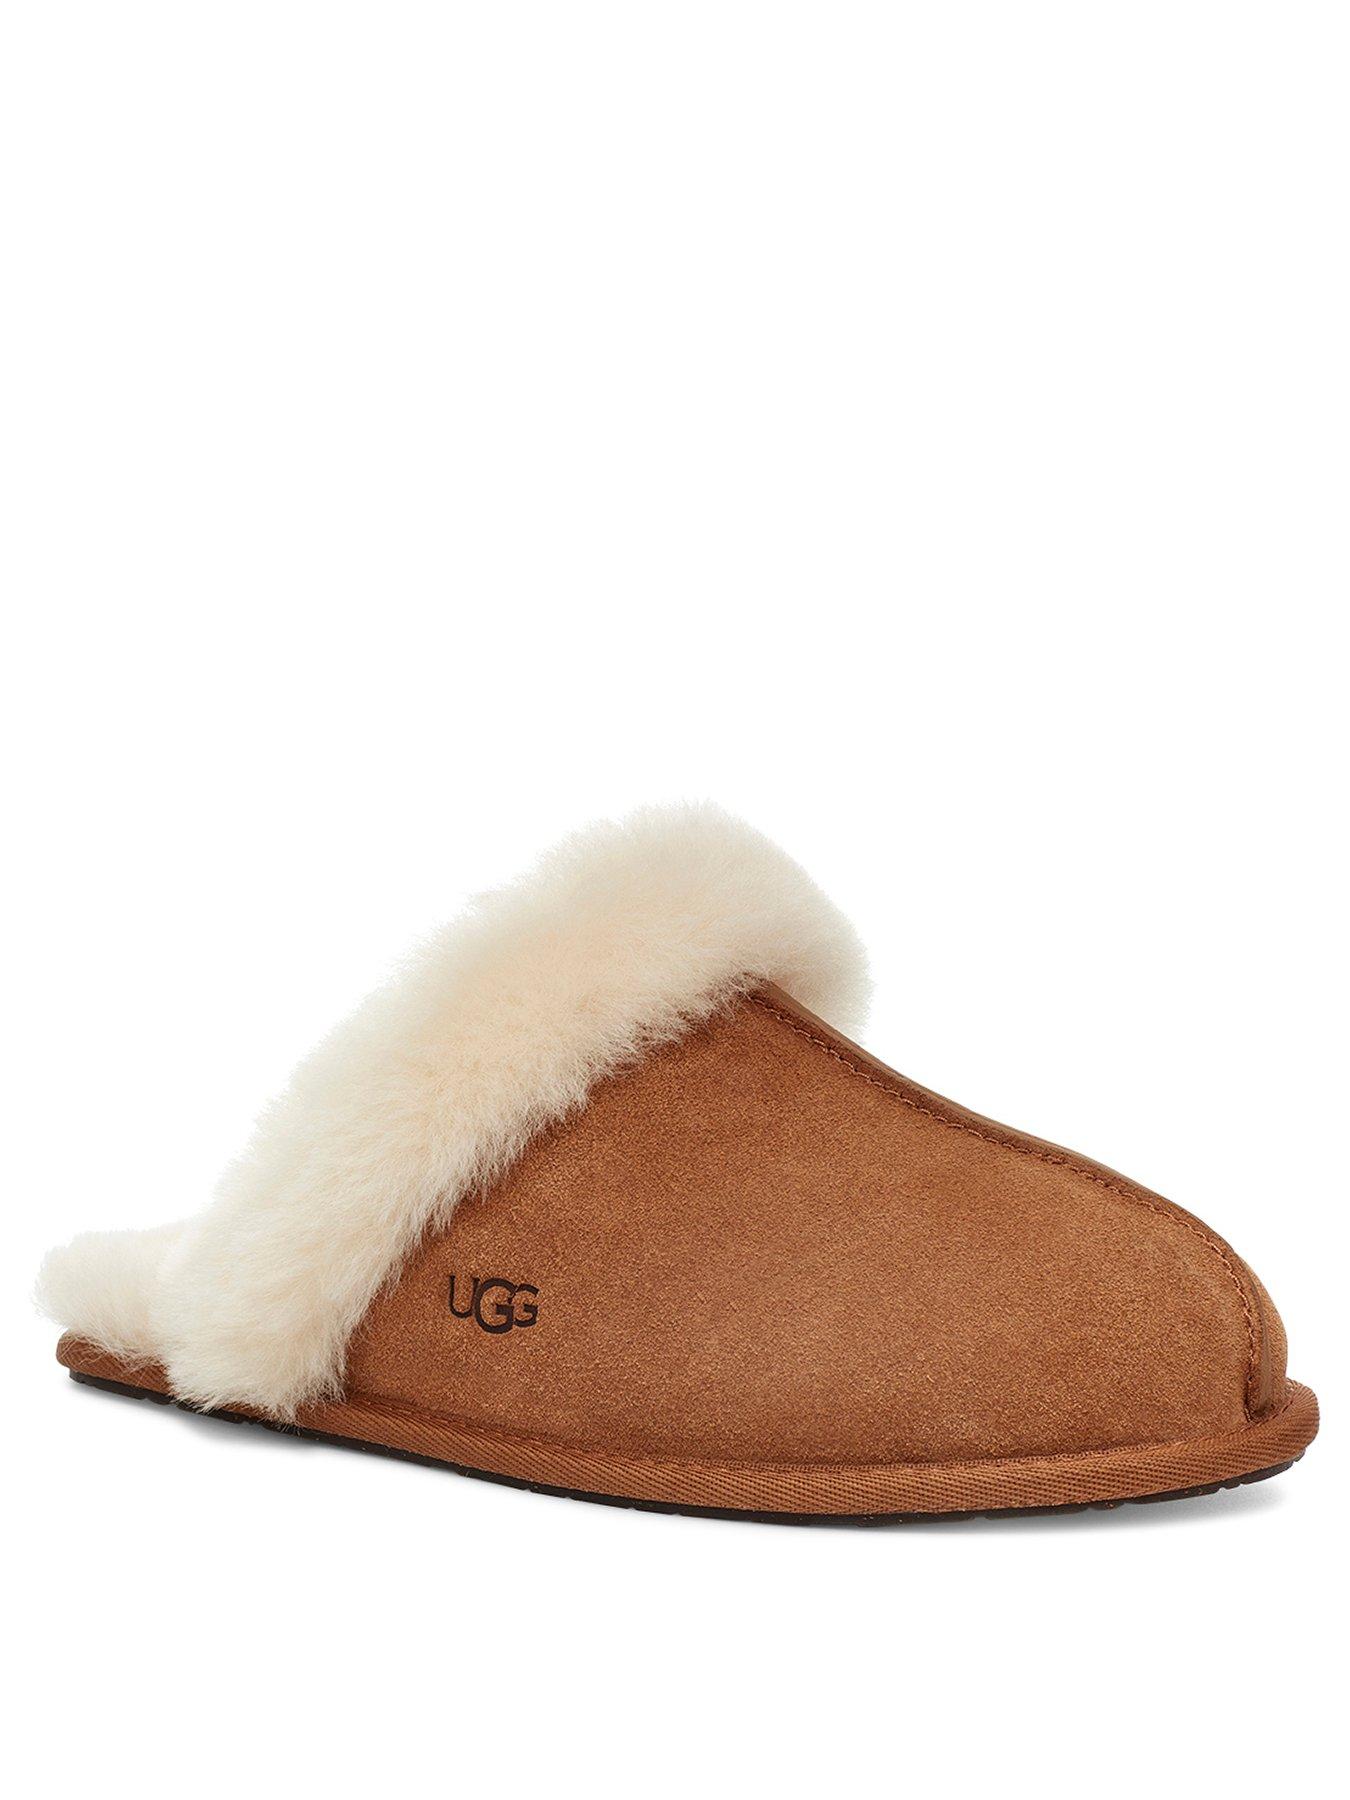 womens leather ugg boots uk